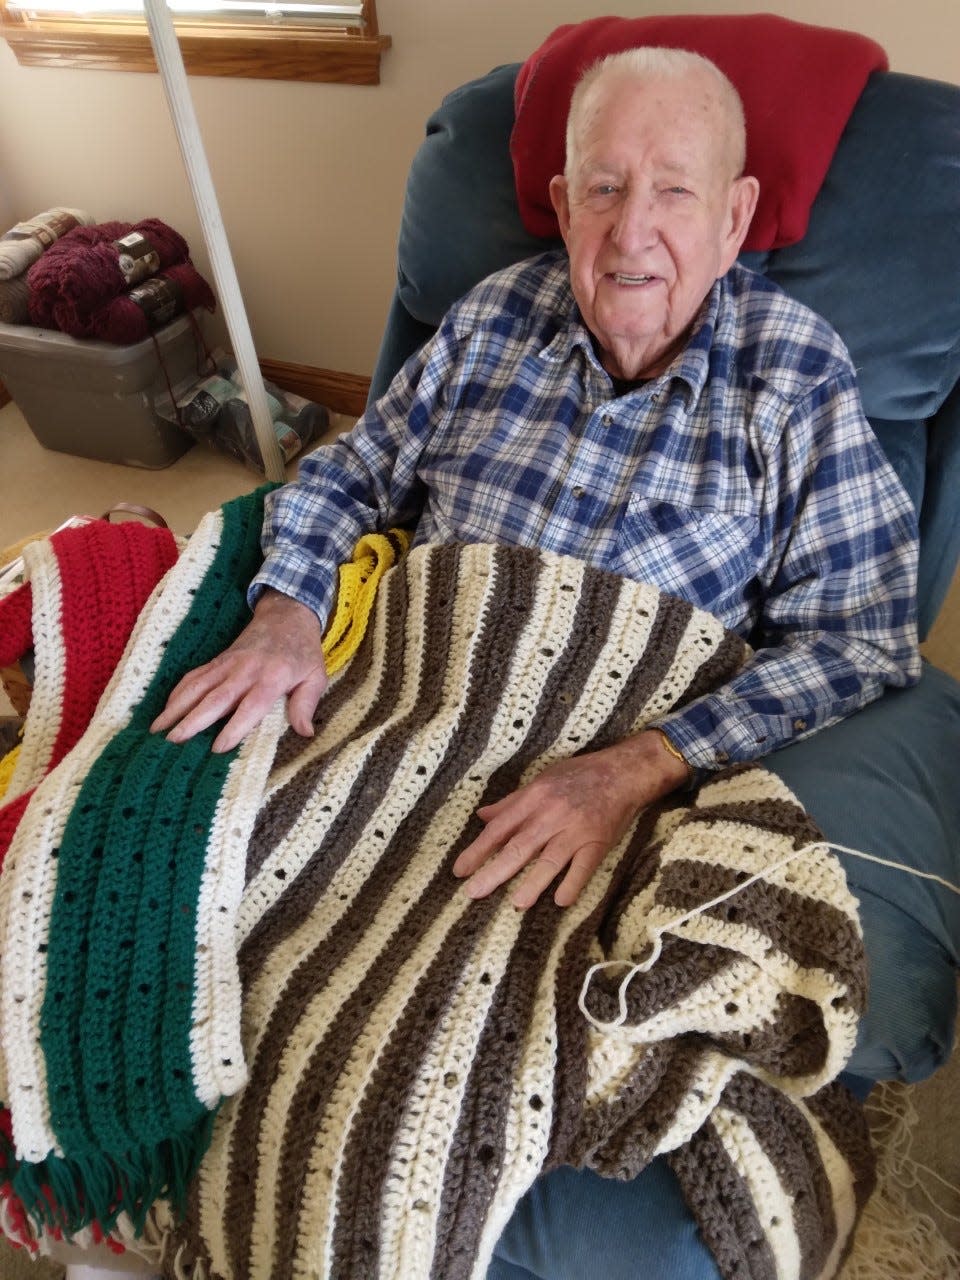 Bert Kohler, 91, of Dover has made about 500 scarves for free distribution by the Scarf Project.